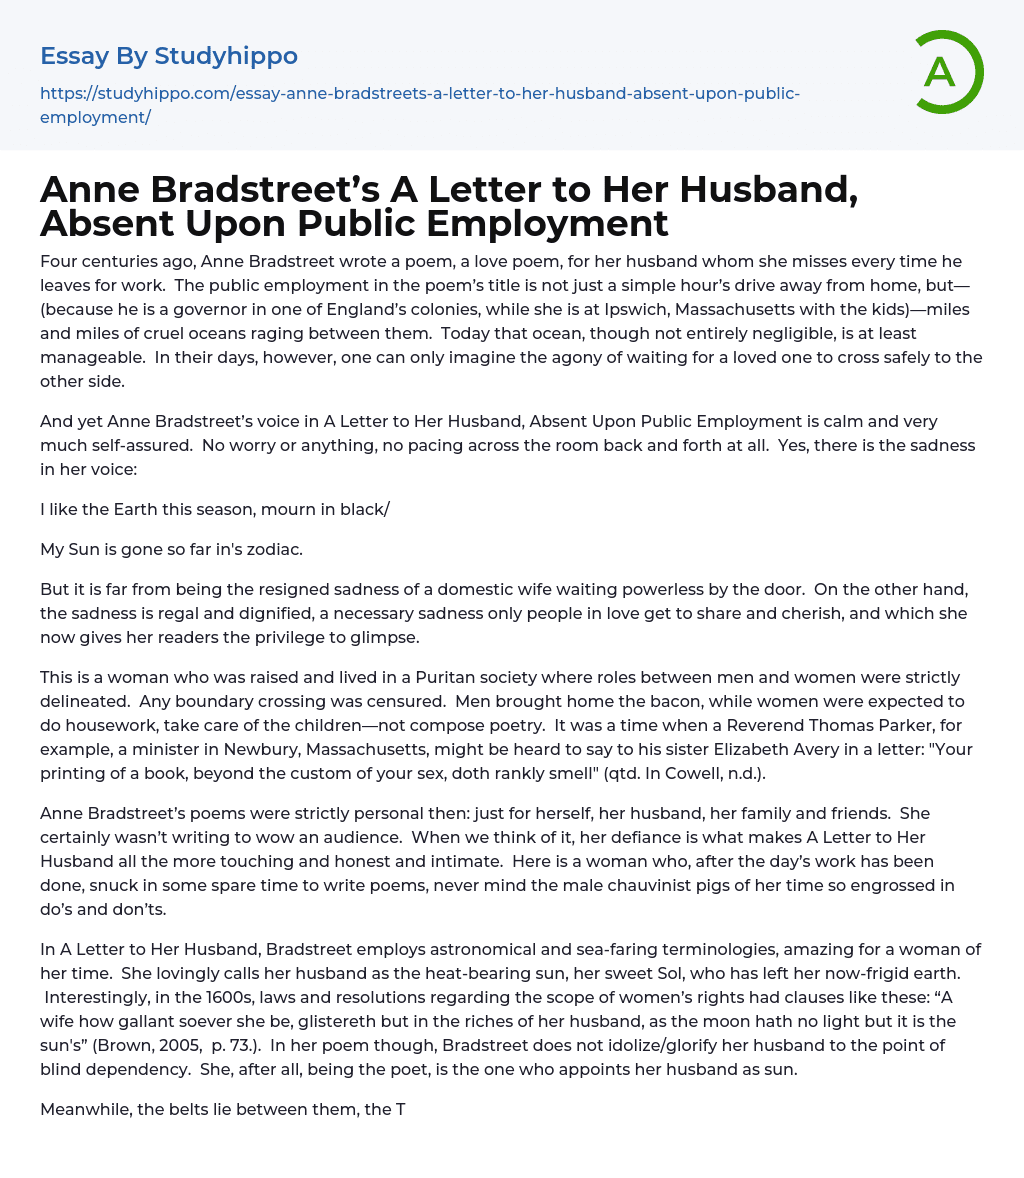 Anne Bradstreet’s A Letter to Her Husband, Absent Upon Public Employment Essay Example